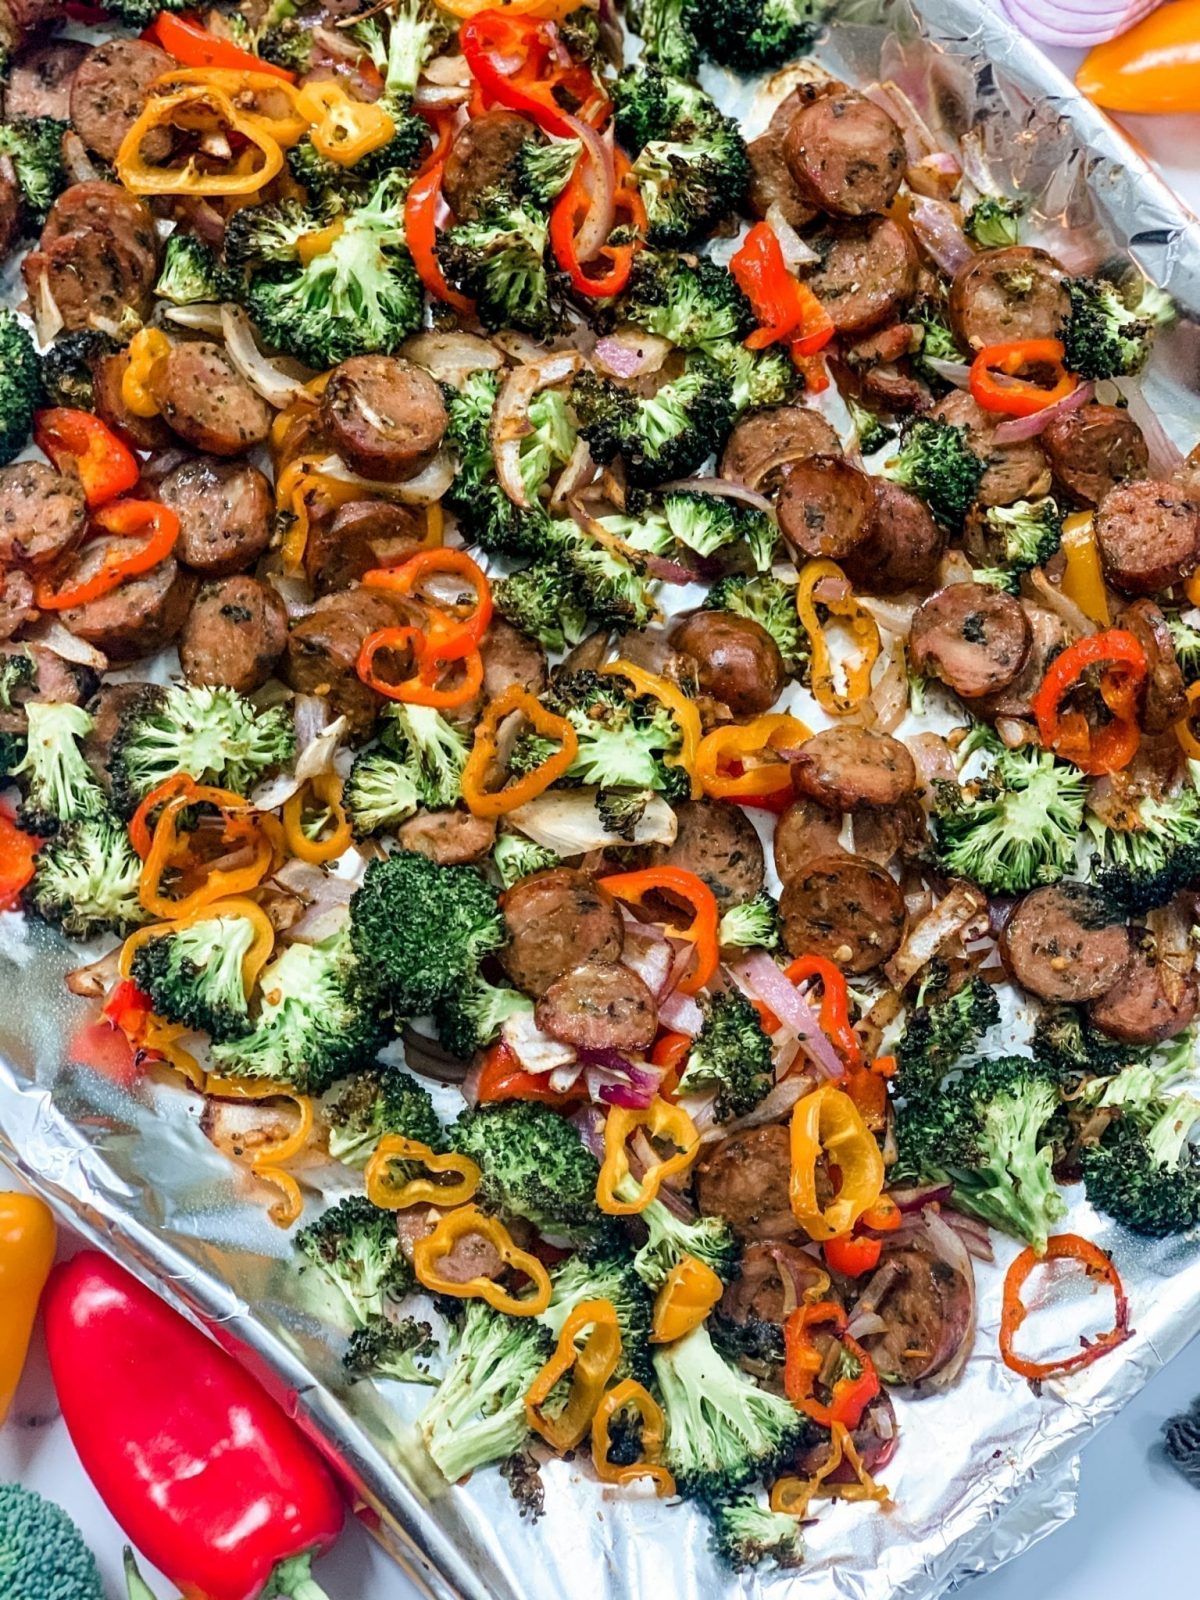 Sheet Pan Sausage with Veggies - The Defined Dish